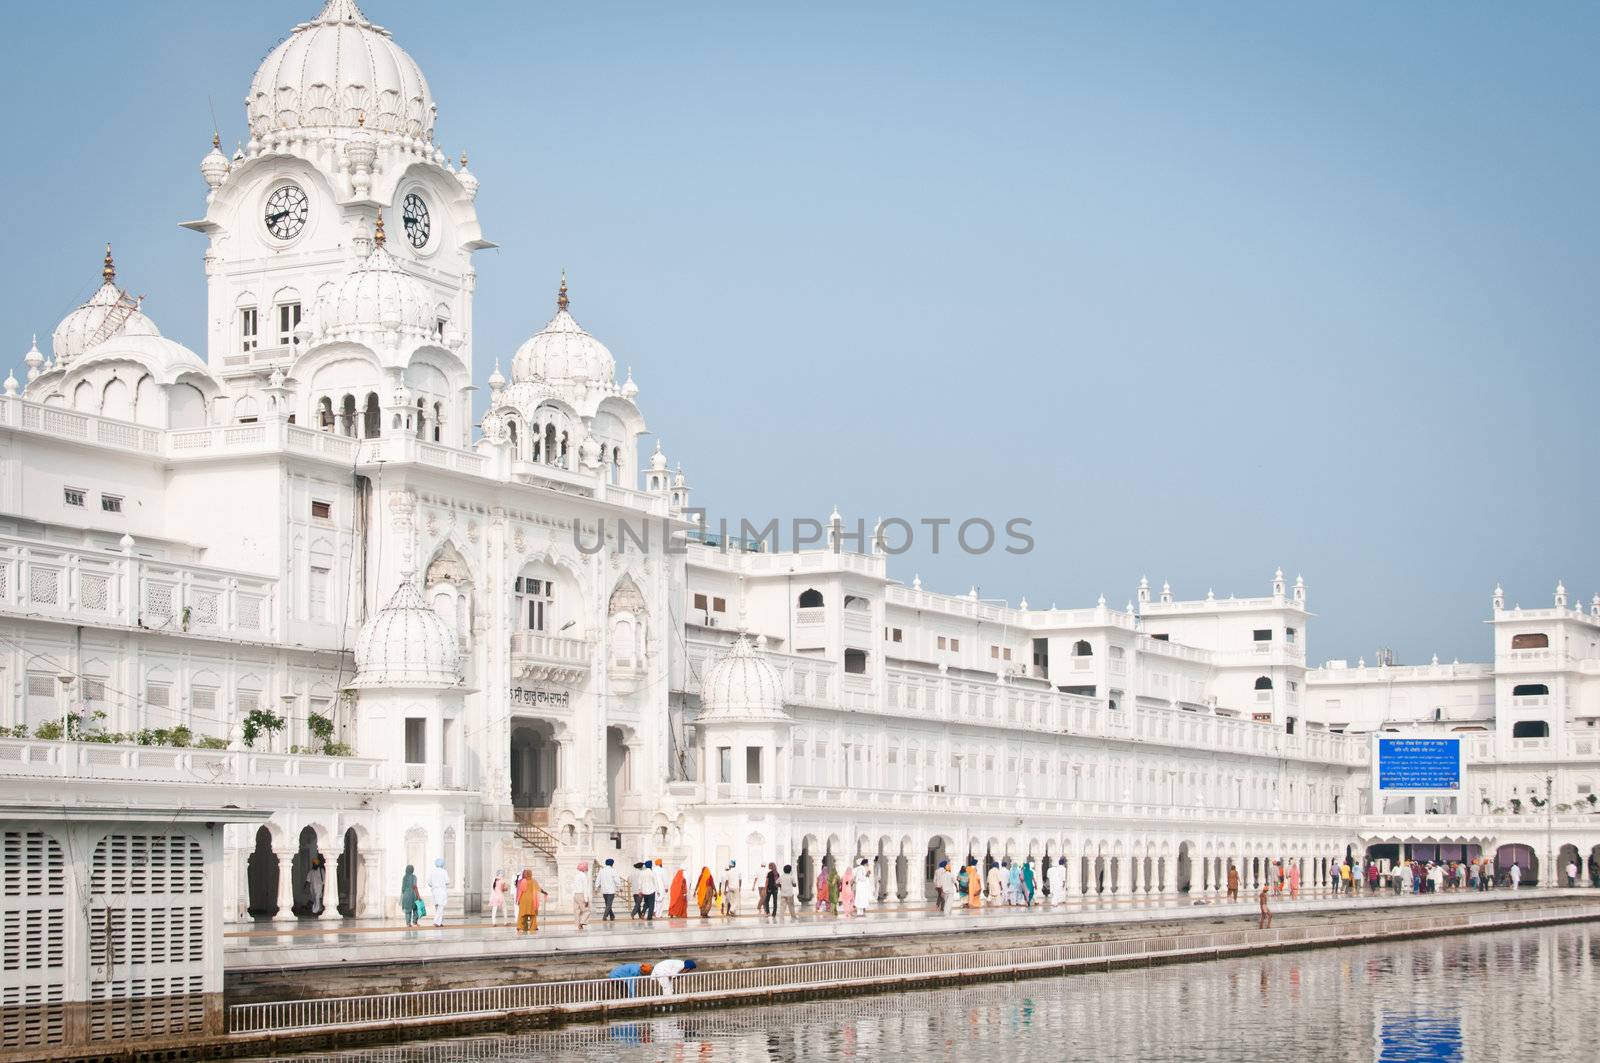 Amritsar, India - August 26, 2011: Pilgrims walk in the Harmandir Sahib Complex, the spiritual and cultural center of the Sikh religion